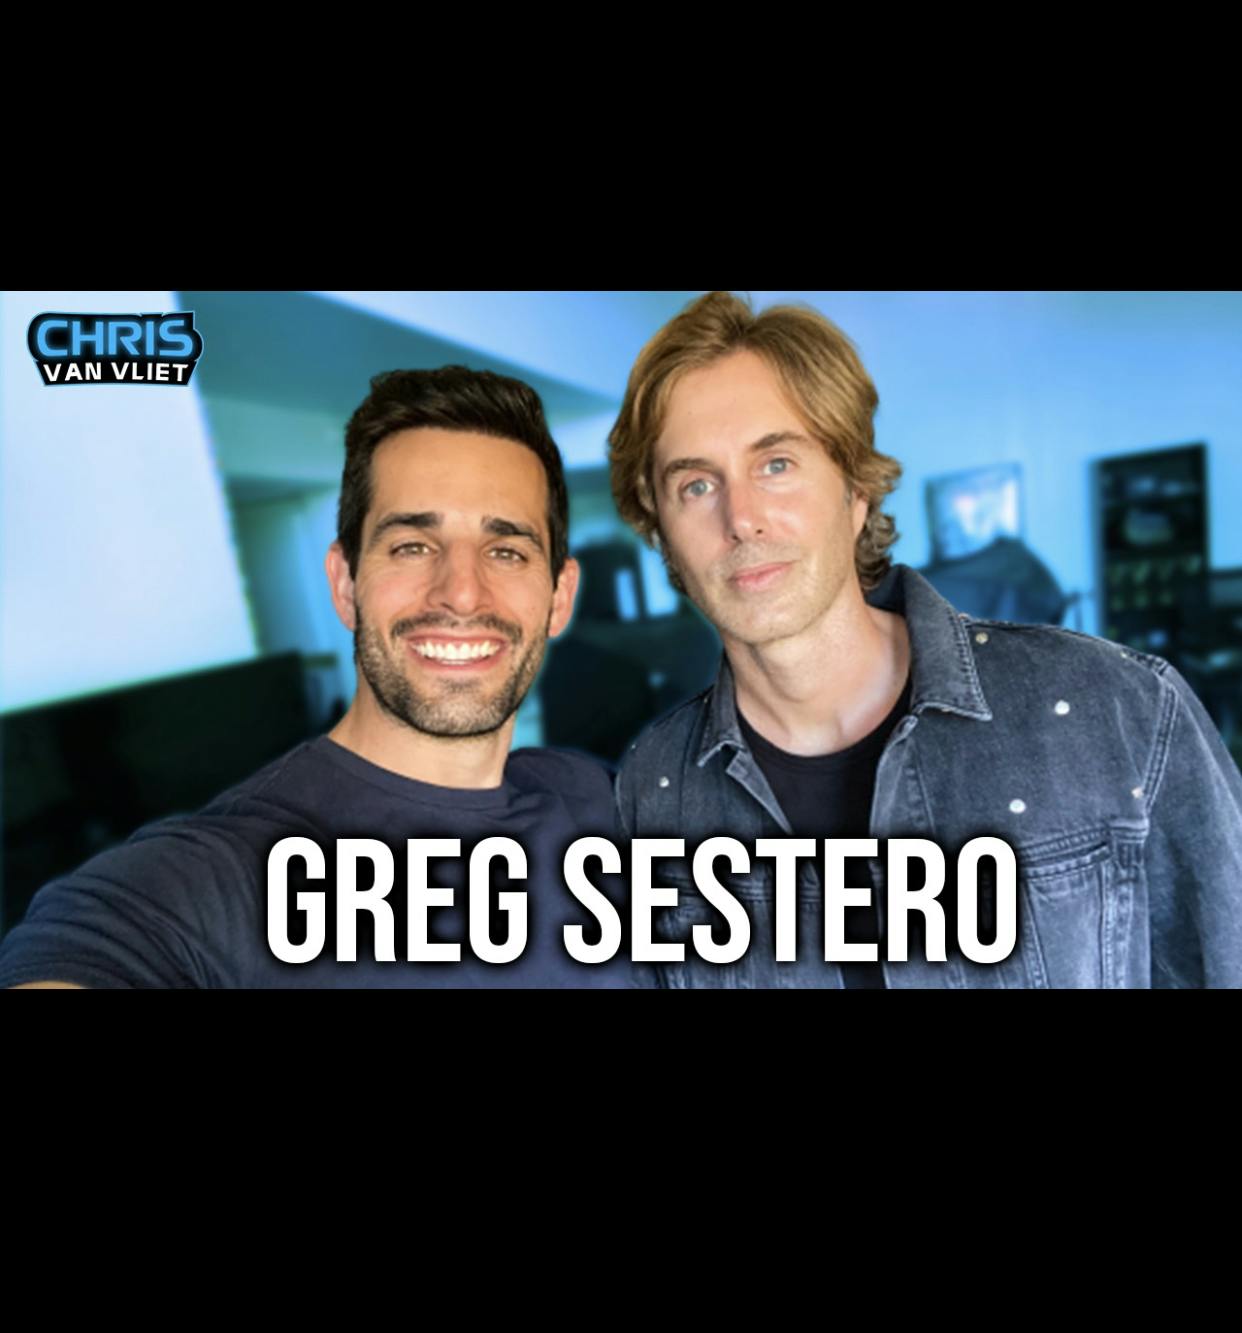 Greg Sestero on The Worst Movie Of All Time "THE ROOM" - 20 Years Later